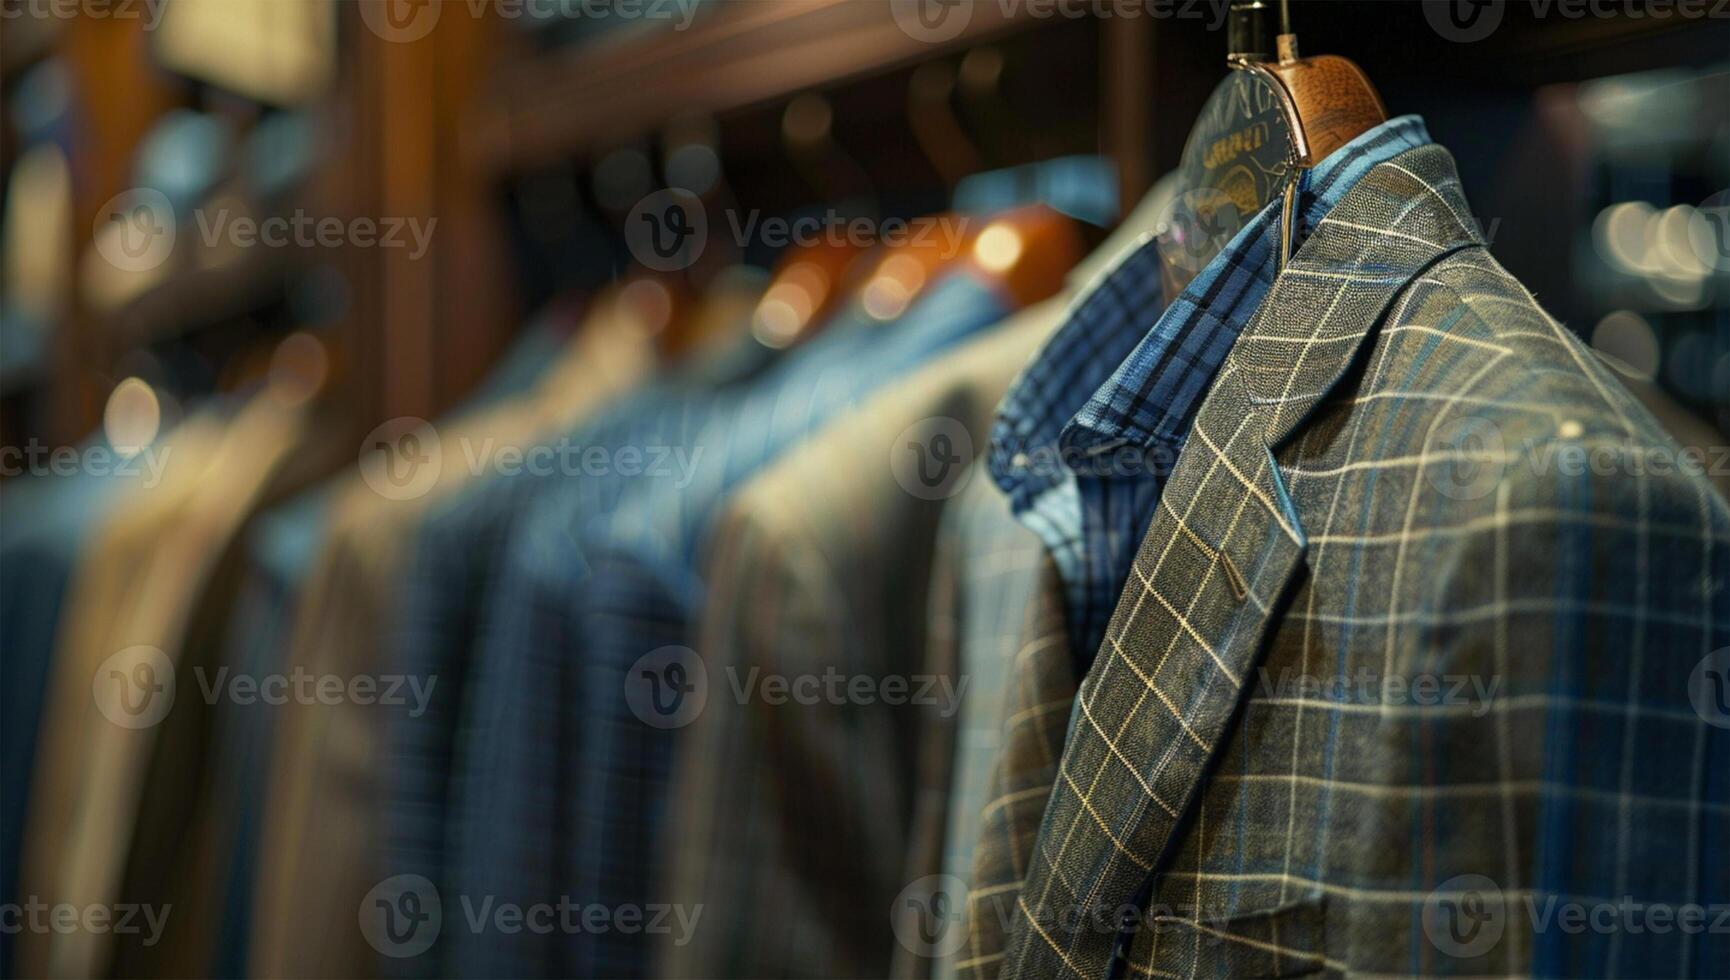 Men's suit and tie in a store. Shallow depth of field. photo